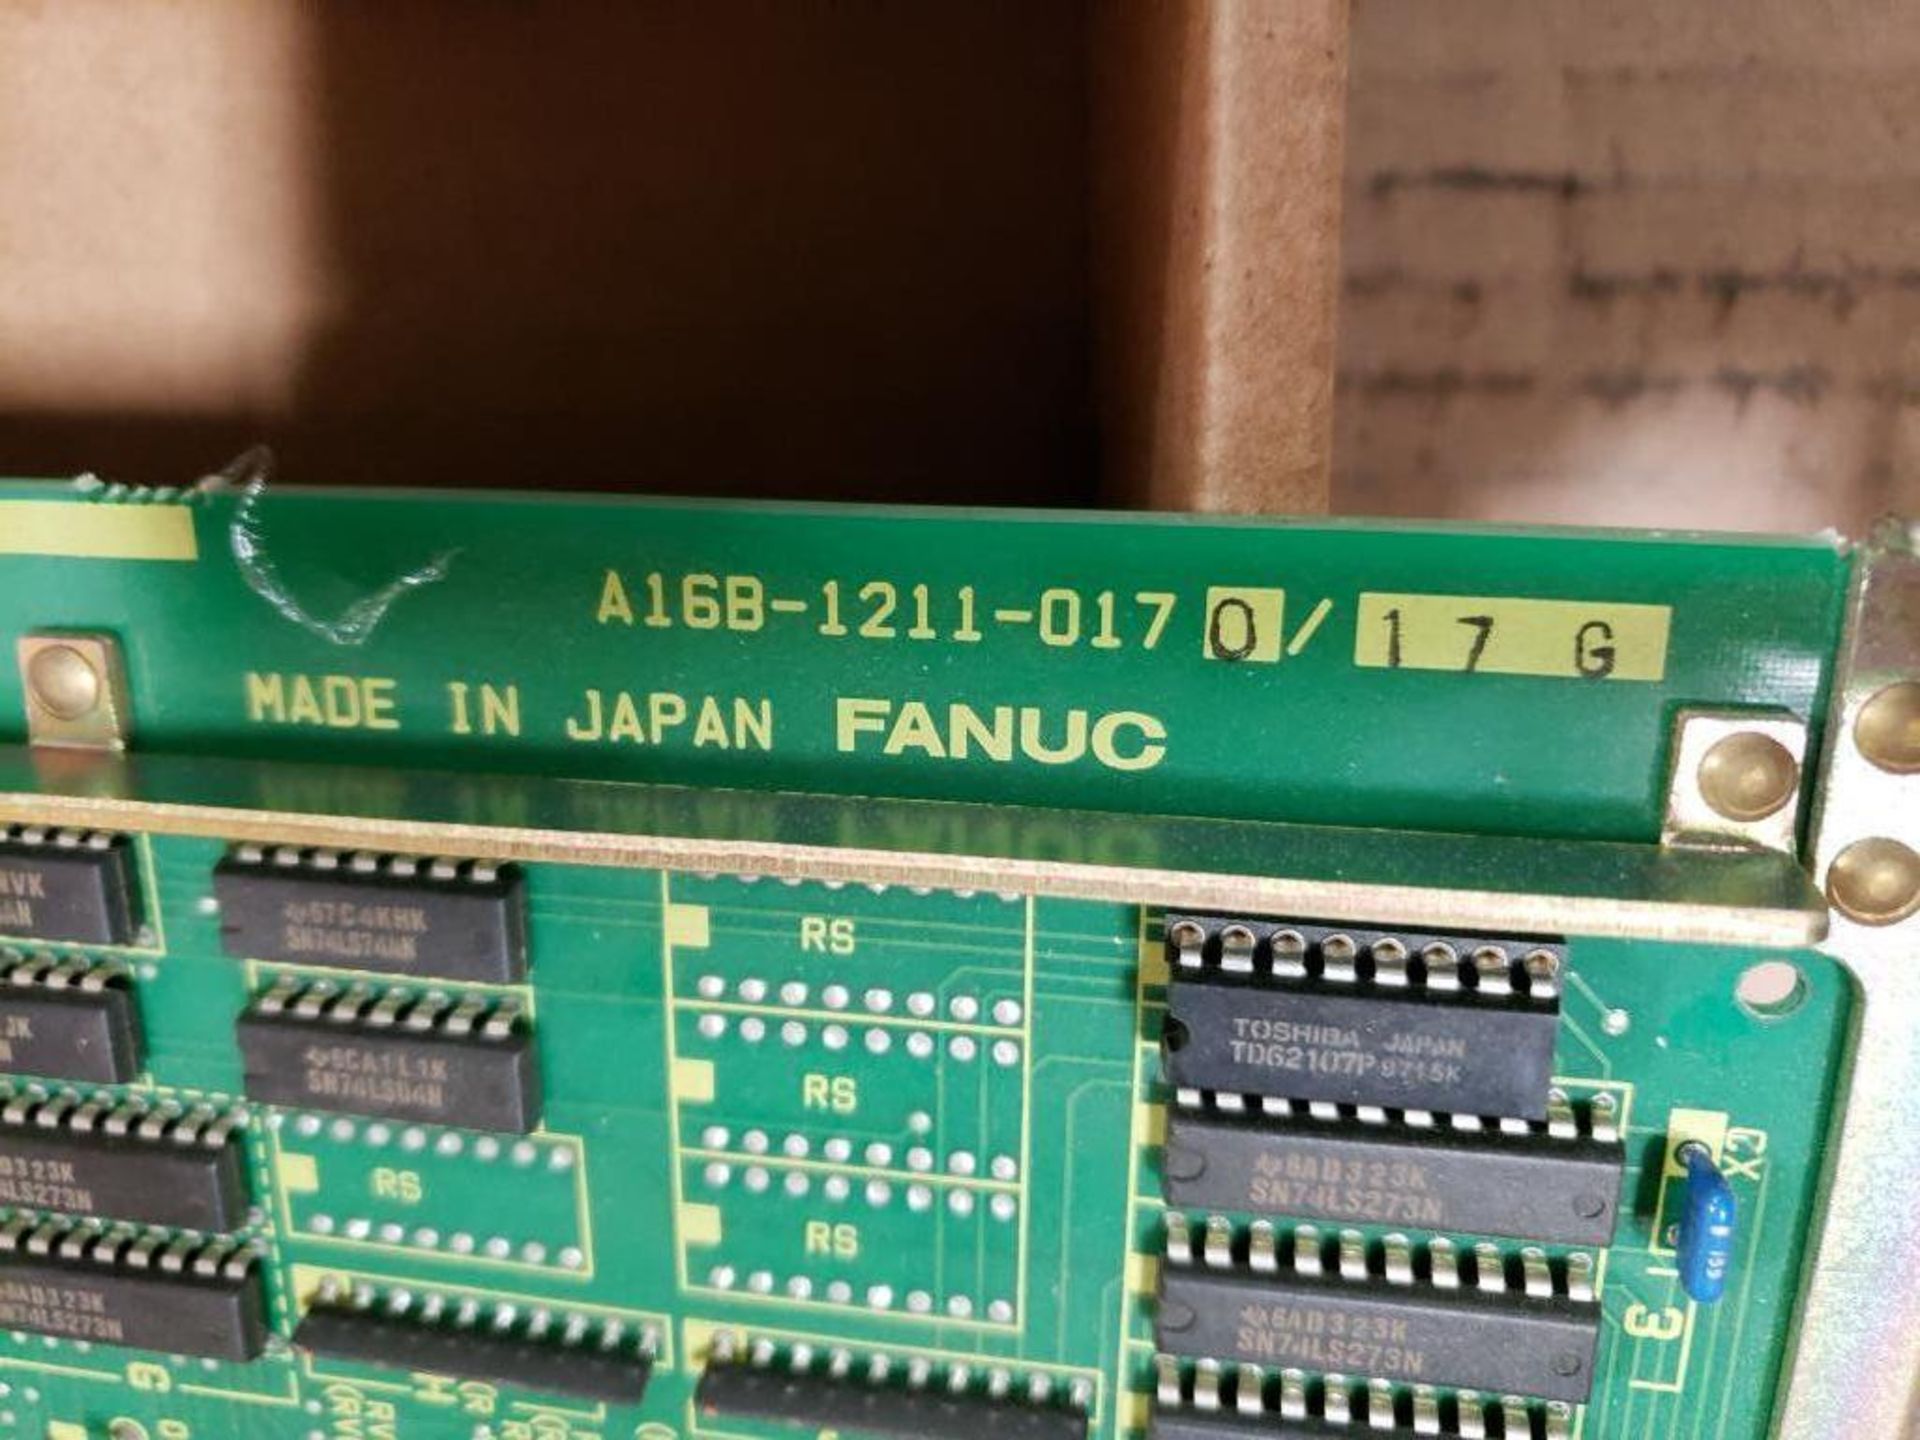 Fanuc control board. Part number A16B-1211-0170/17G. - Image 3 of 3